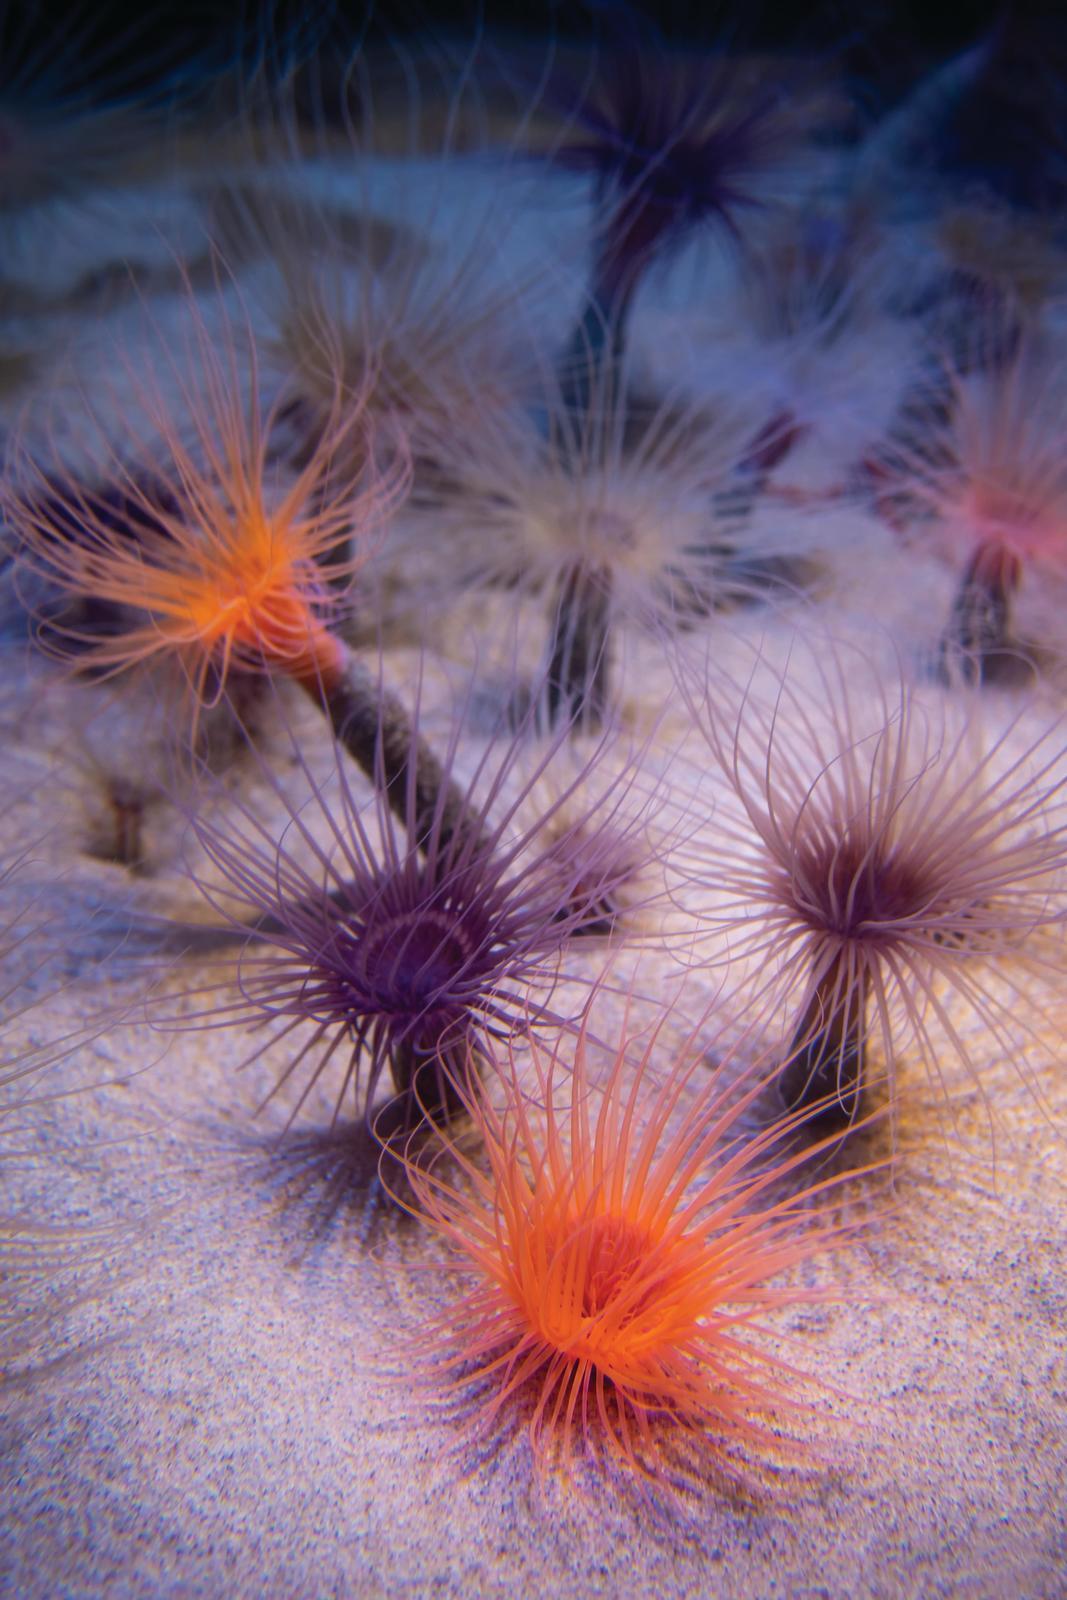 A multi-colored array of tube anemones homegrown at the Aquarium int he sand, with oranges and purples and creams